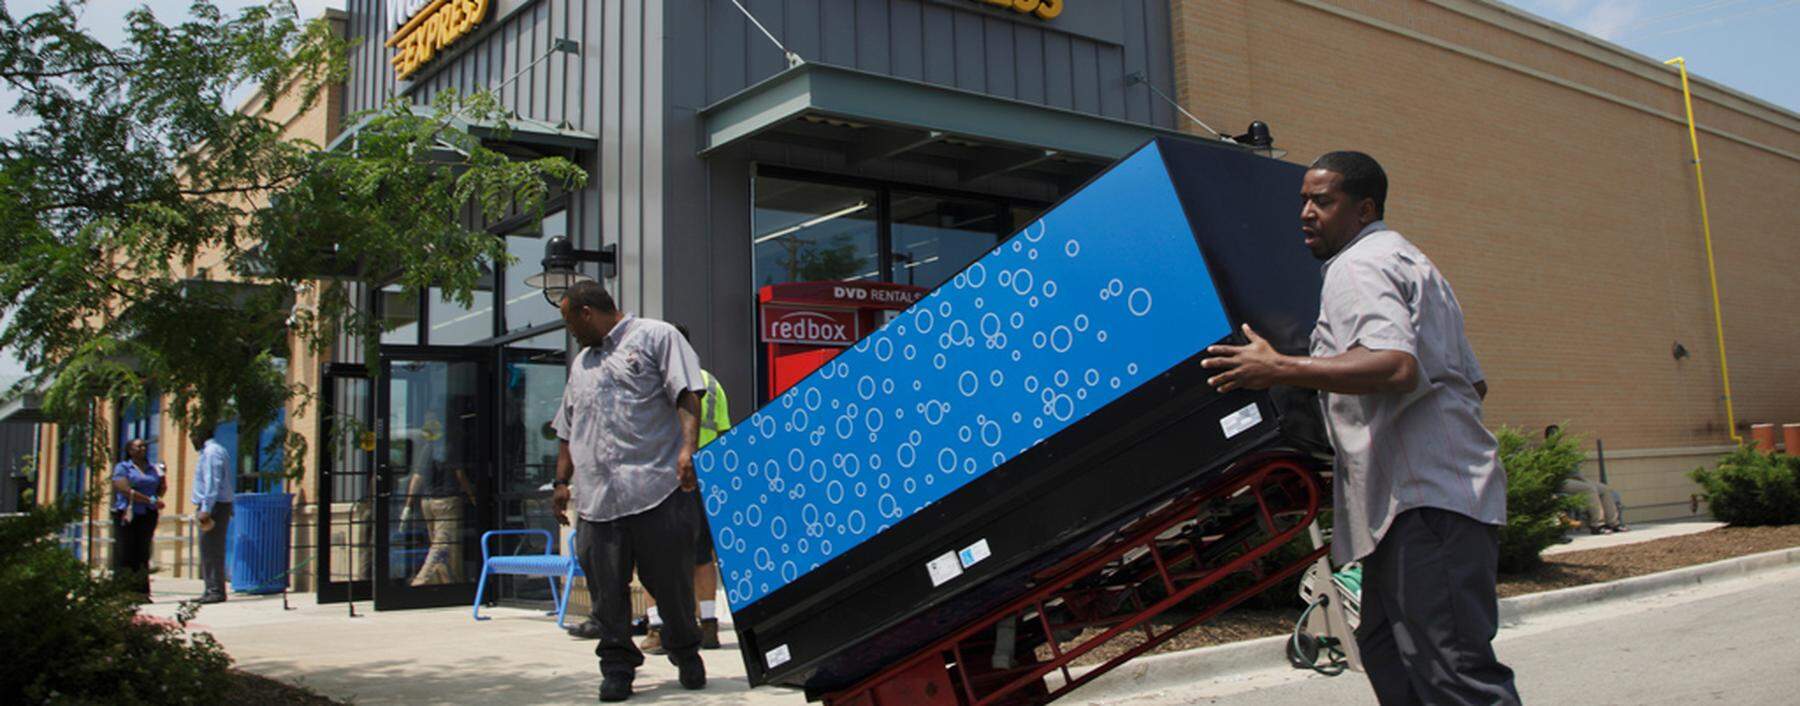 Workers move a vending machine into position outside a new Walmart Express store in Chicago